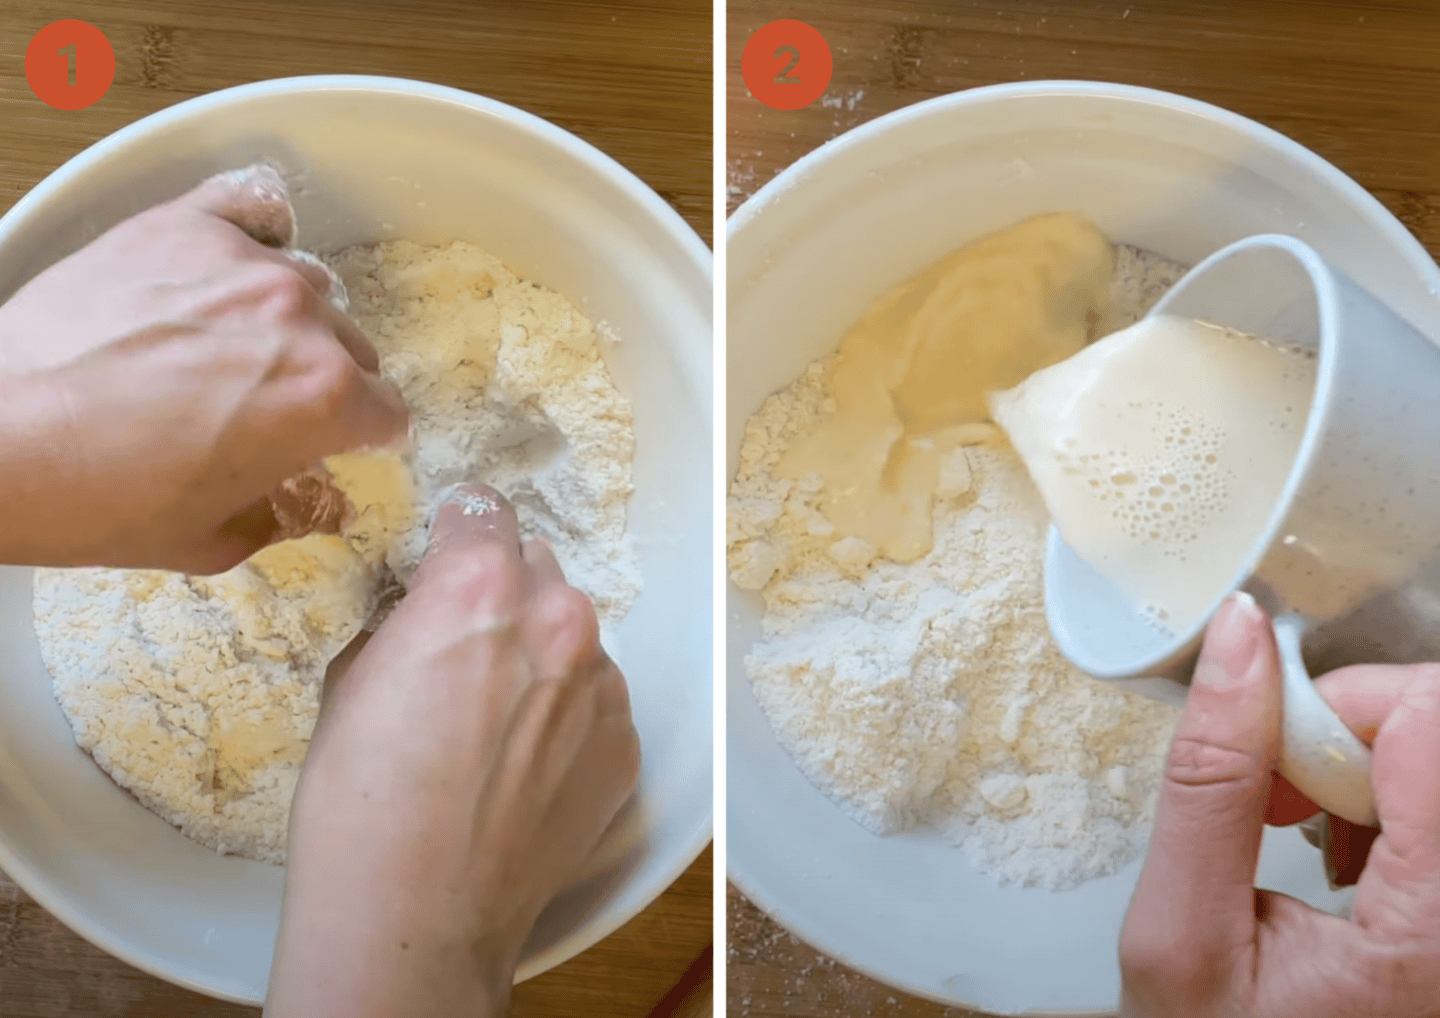 Mix the dry scone mixture with your fingertips then add the milk and egg.